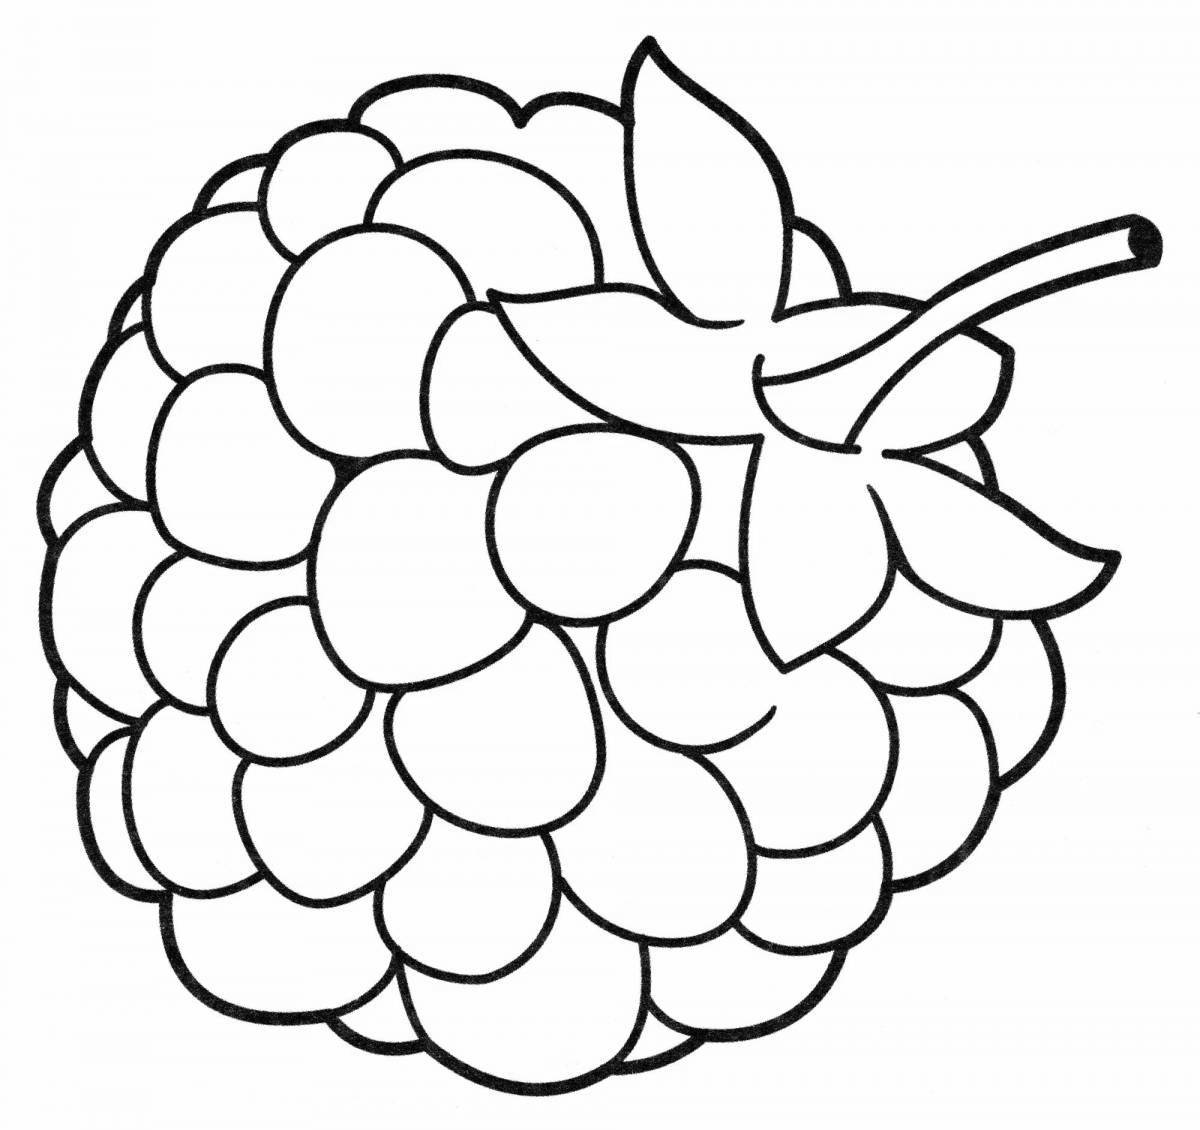 Sweet raspberry coloring page